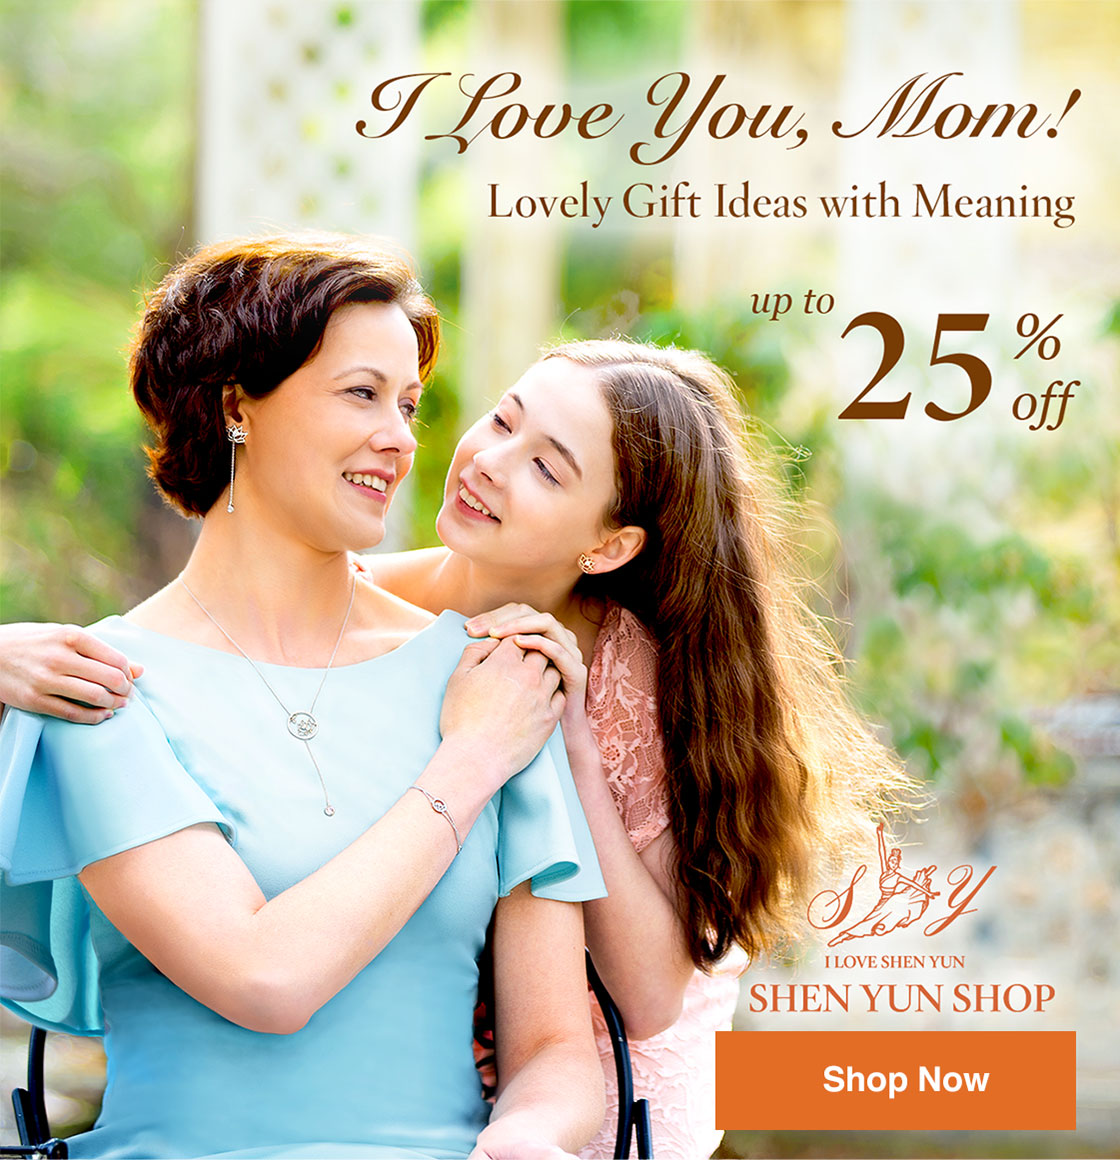 I Love you, Mom! Lovely Gift Ideas with Meaning